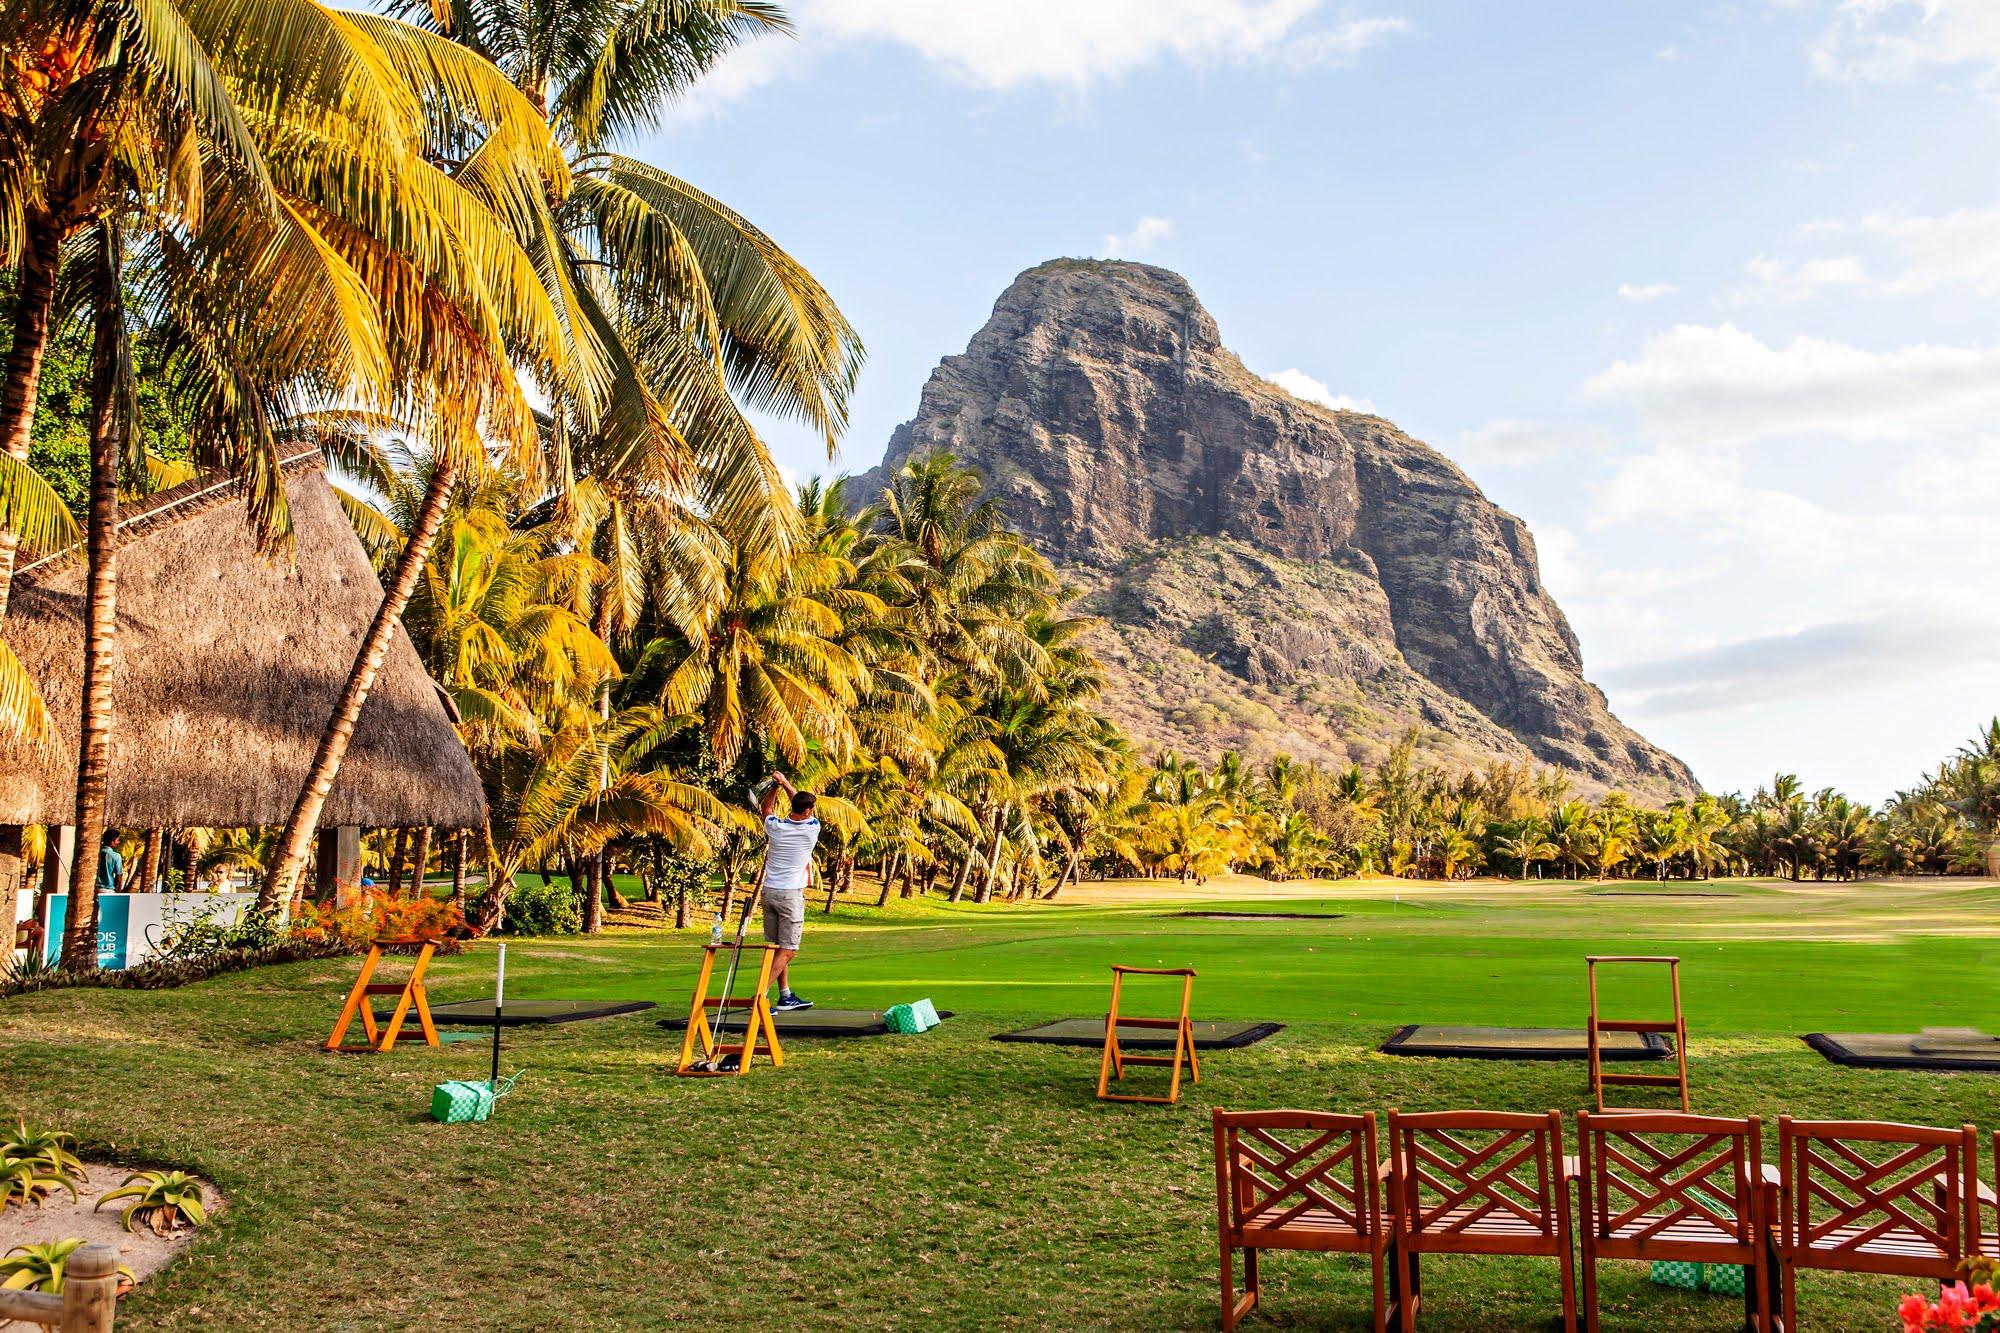 Playing golf on the Mauritius island more than 20 courses